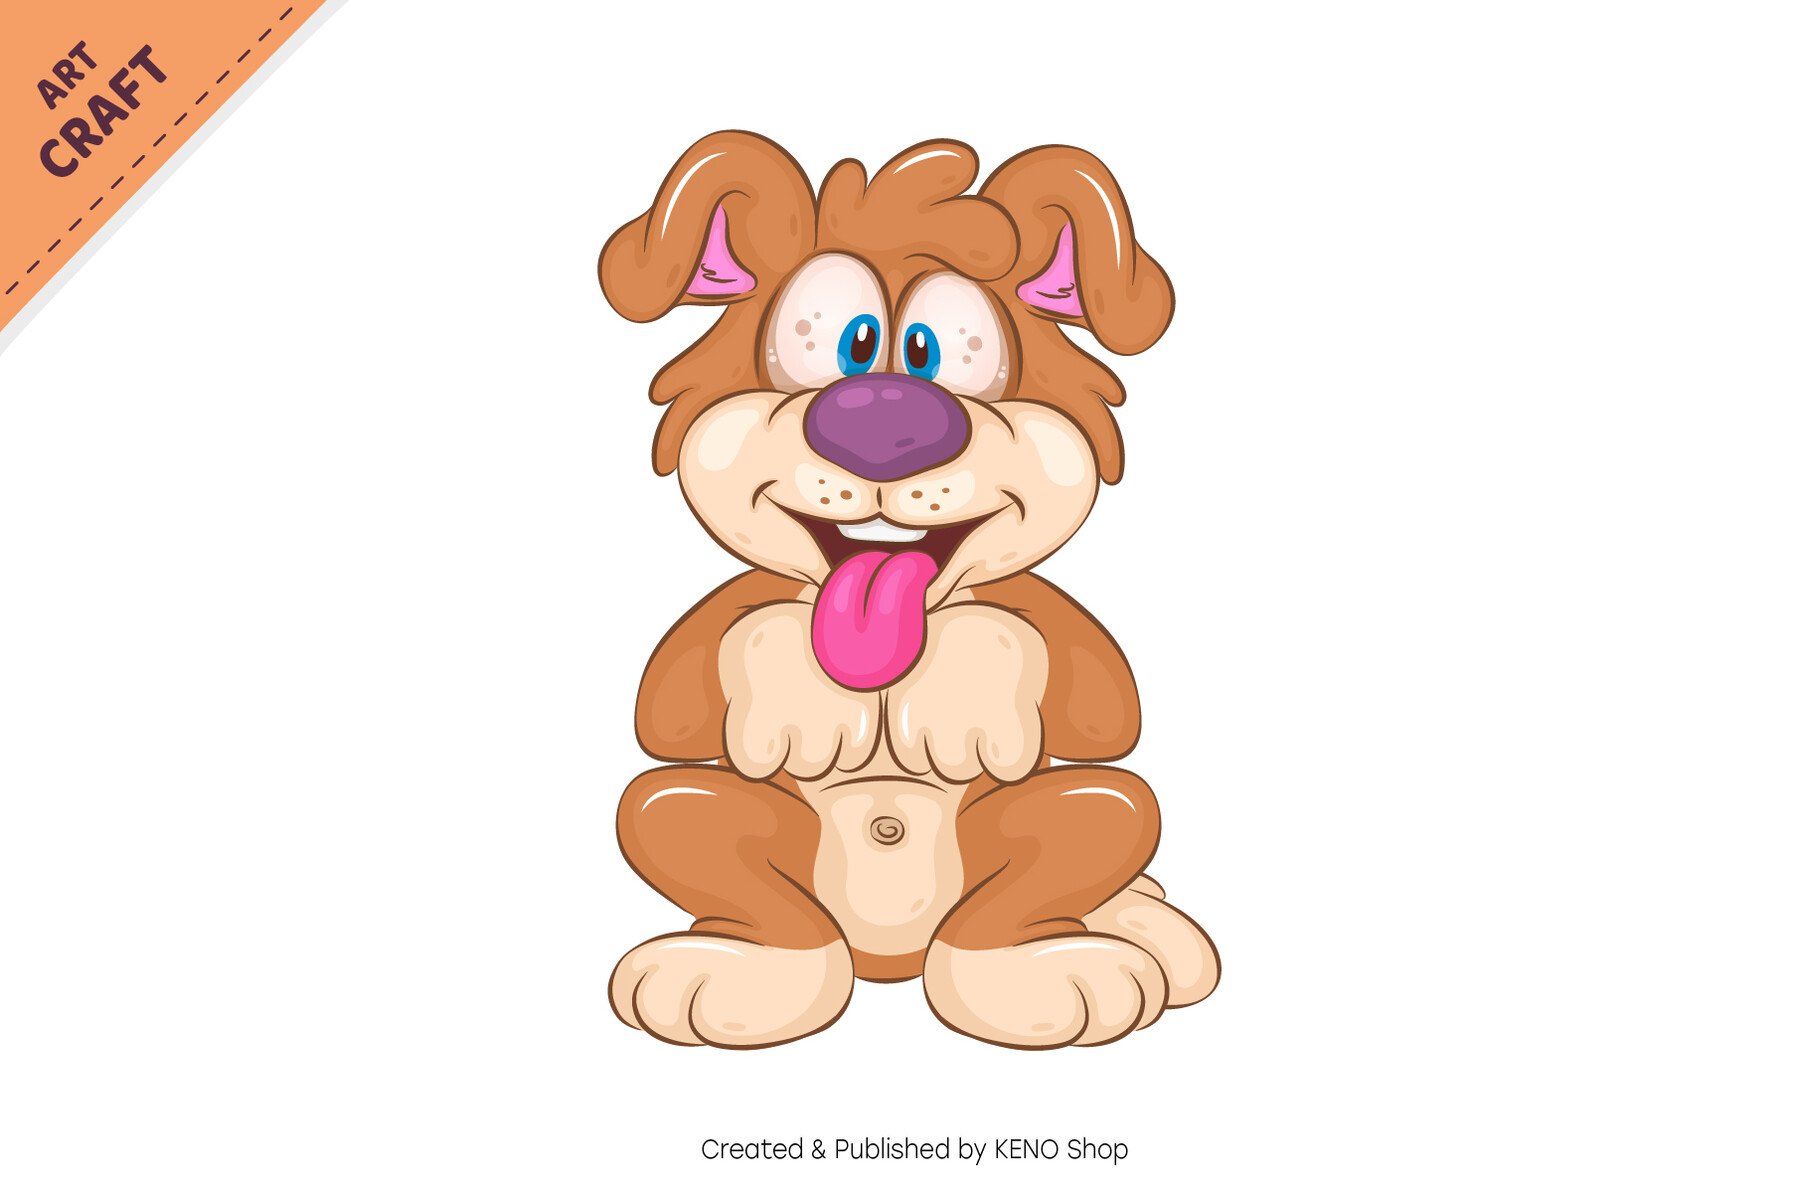 smiling dog face clipart